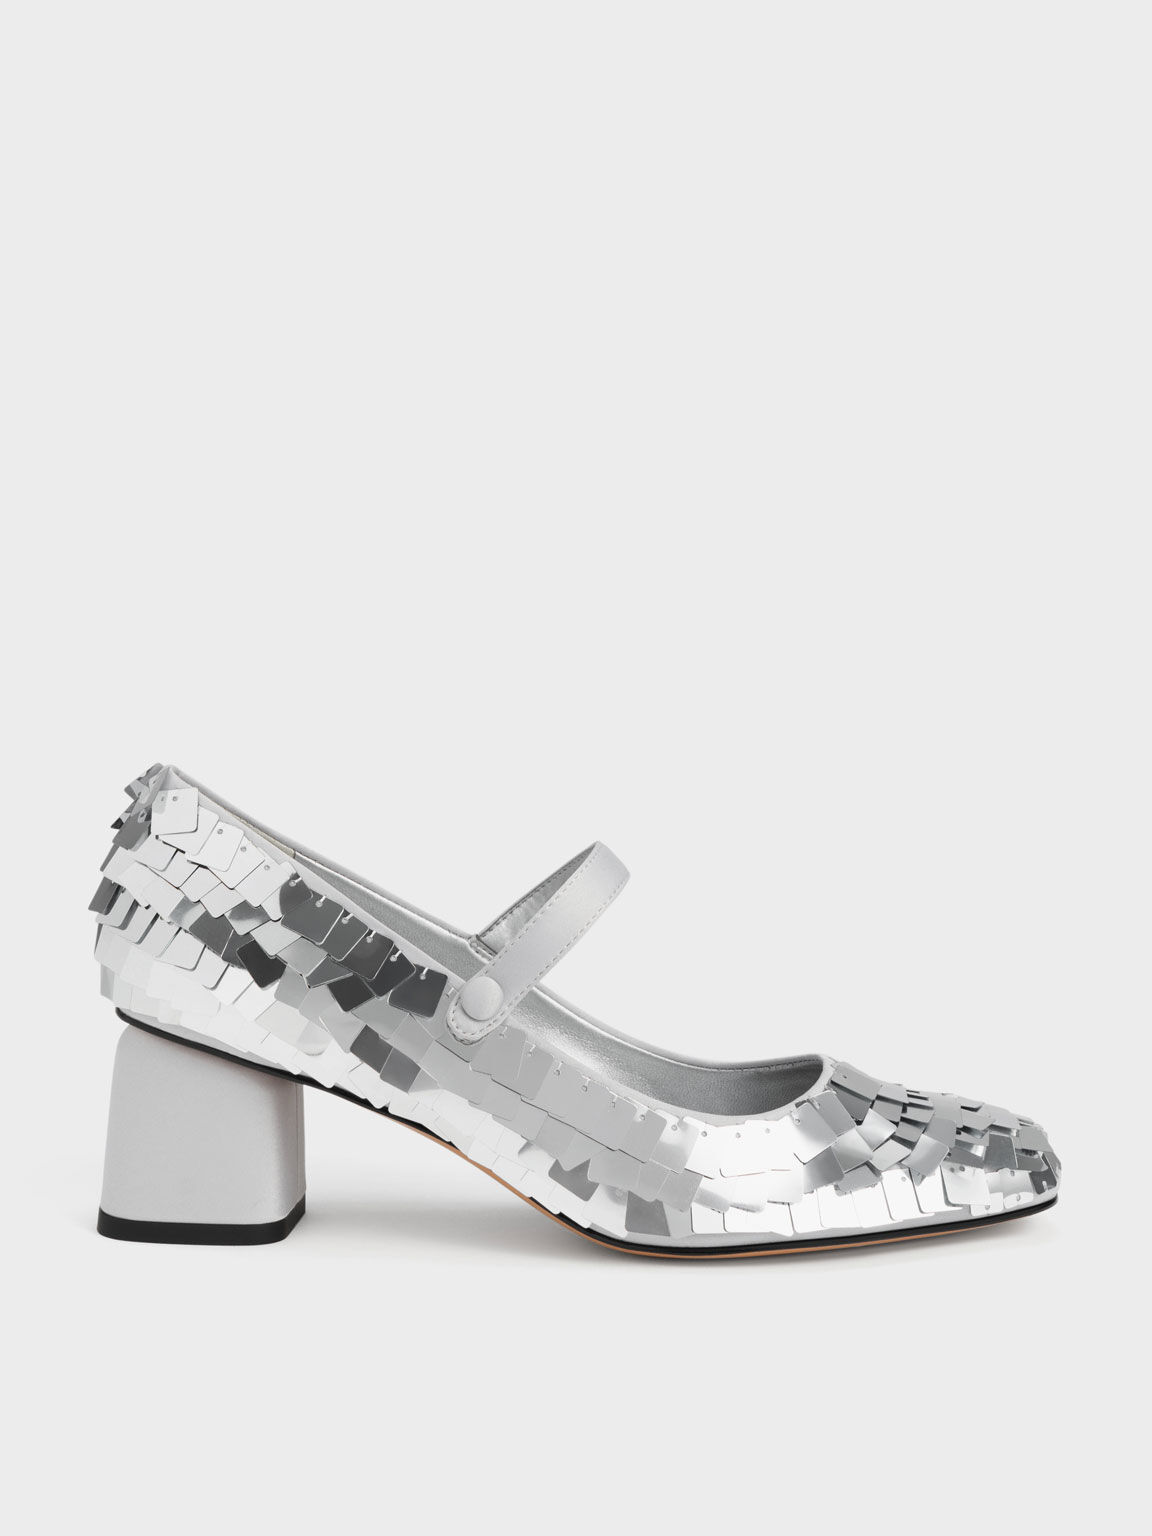 Sequinned Satin Mary Jane Pumps, Silver, hi-res